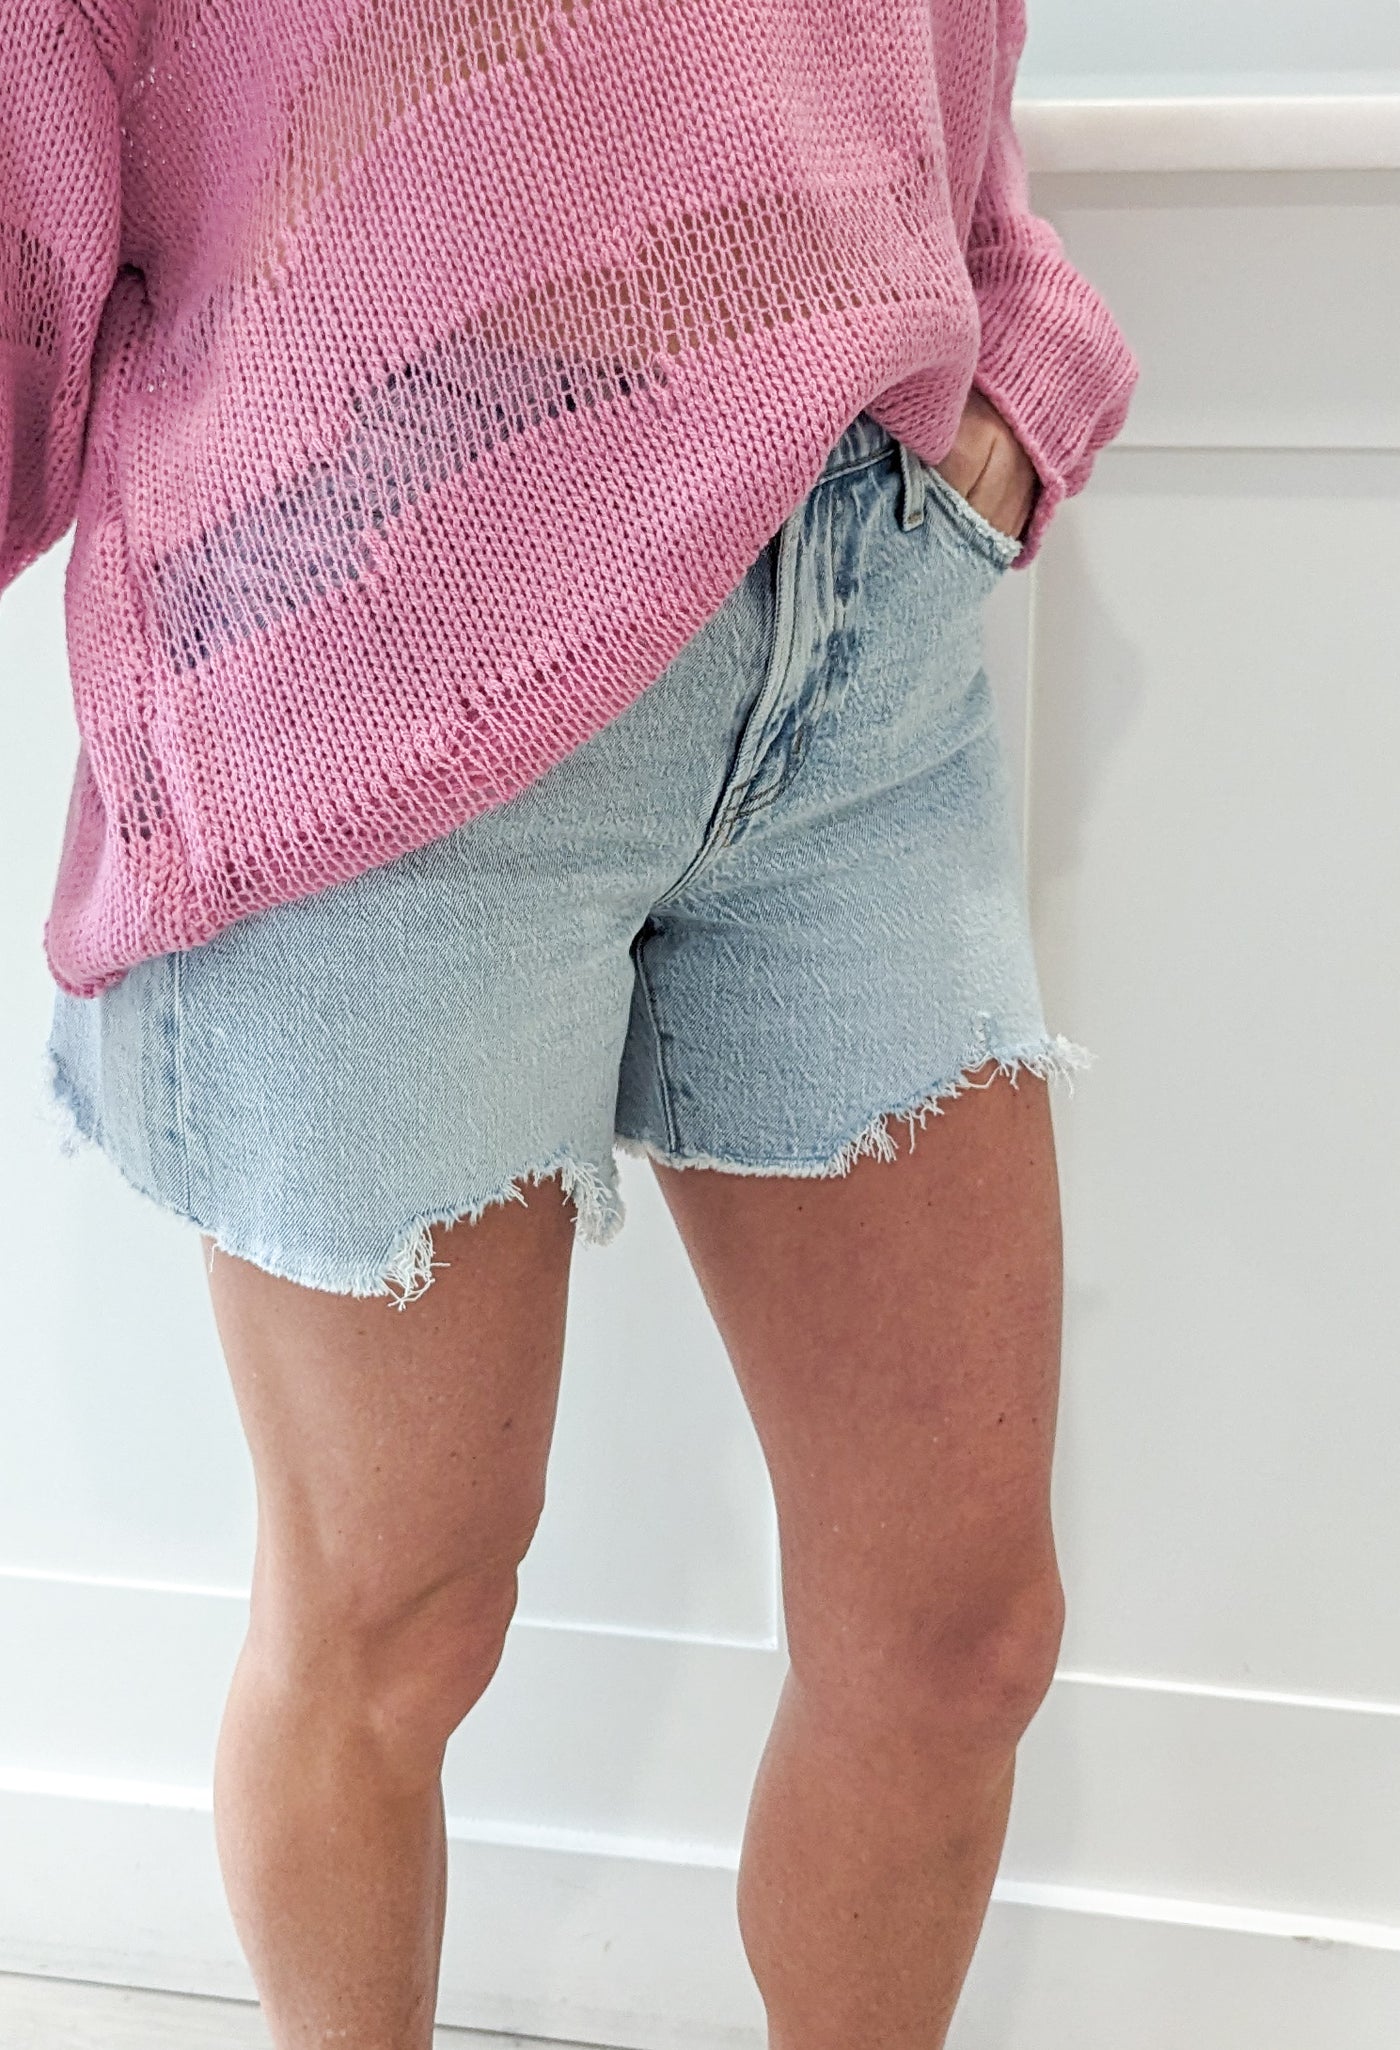 Kennedy Relaxed Fit Cut Off Shorts in Saint Vincent by Pistola